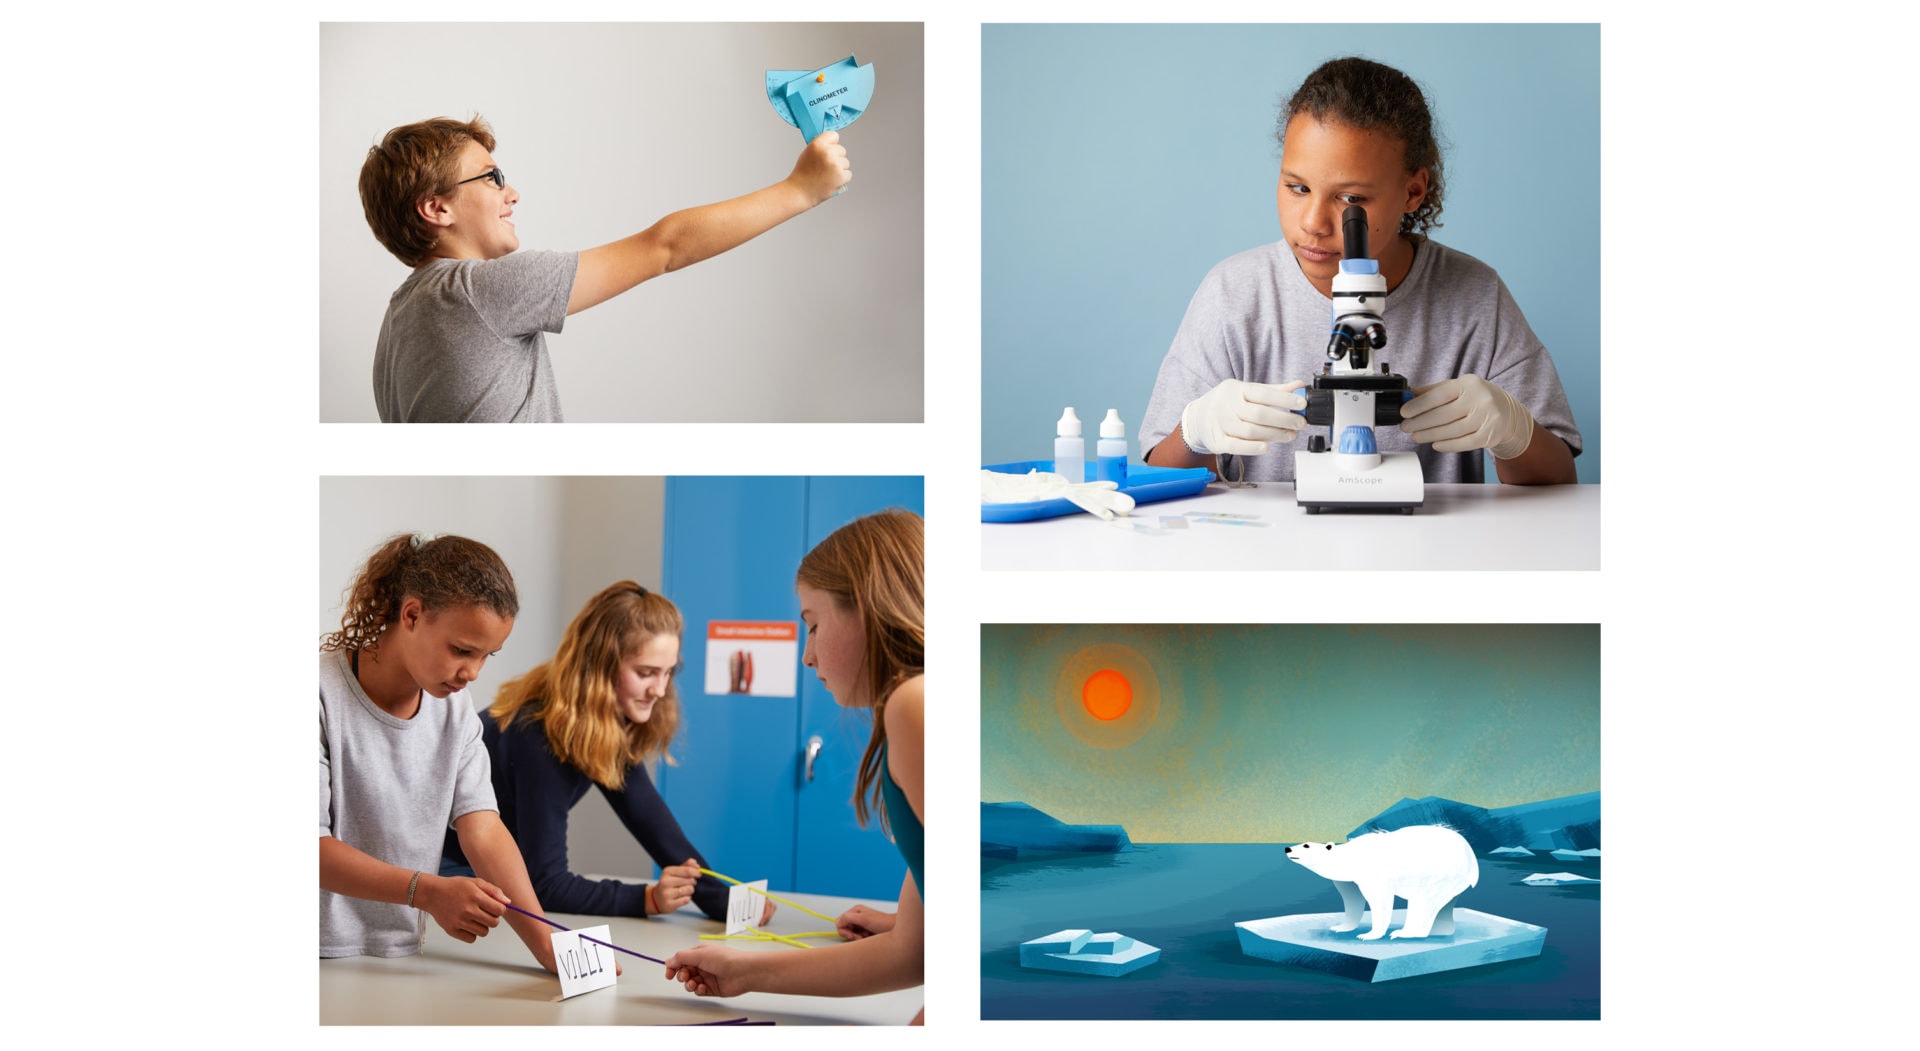 Four images showing children engaging in educational activities: a boy with a paper airplane, a girl using a microscope, girls working on a project together, and an illustration of a polar bear on ice.